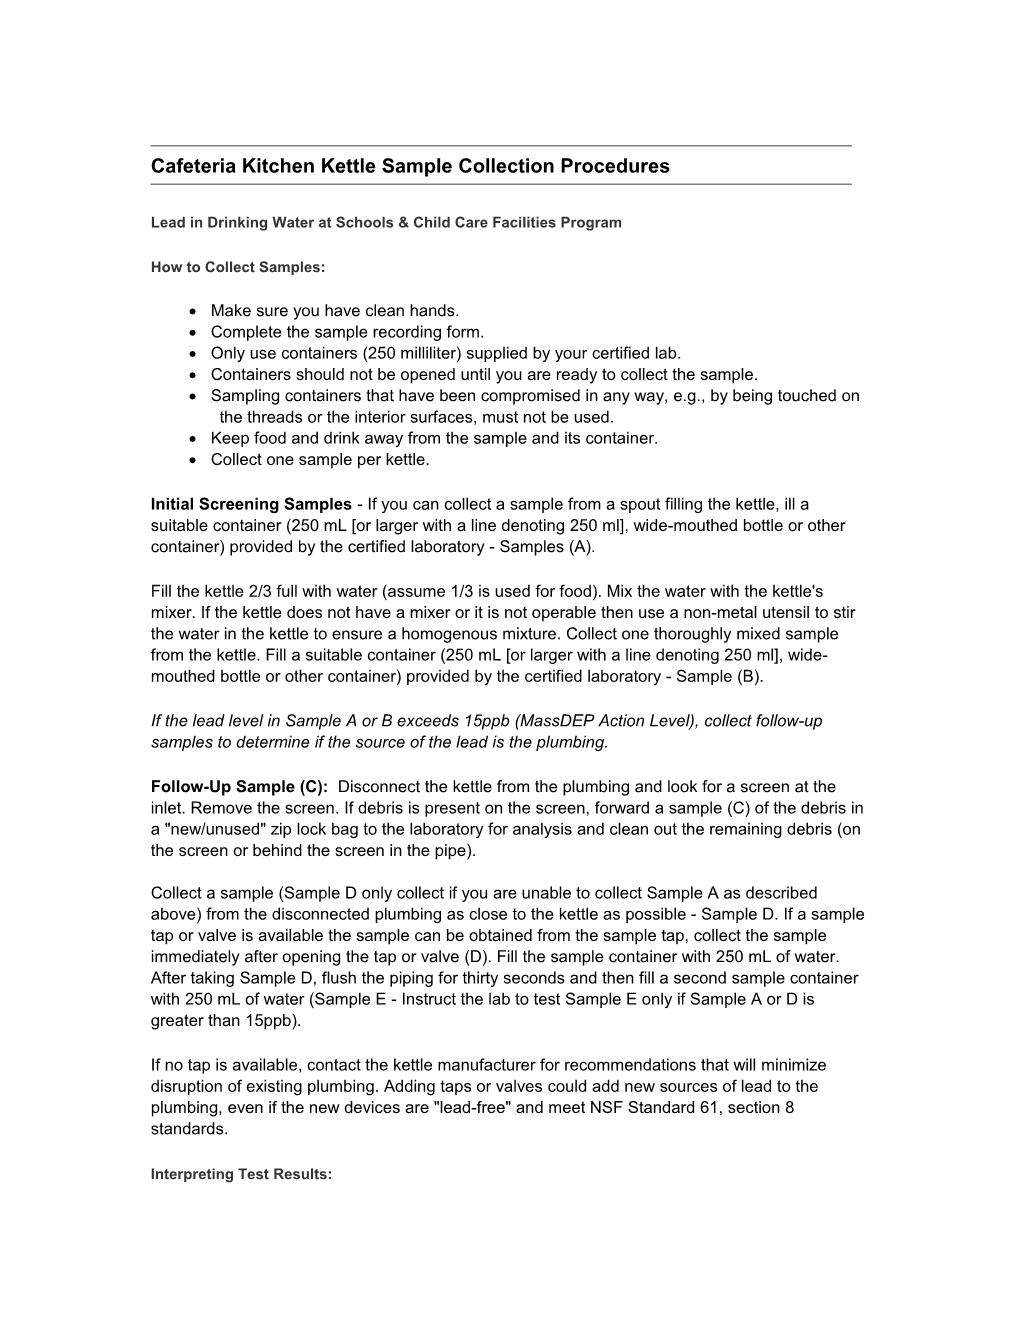 Cafeteria Kitchen Kettle Sample Collection Procedures